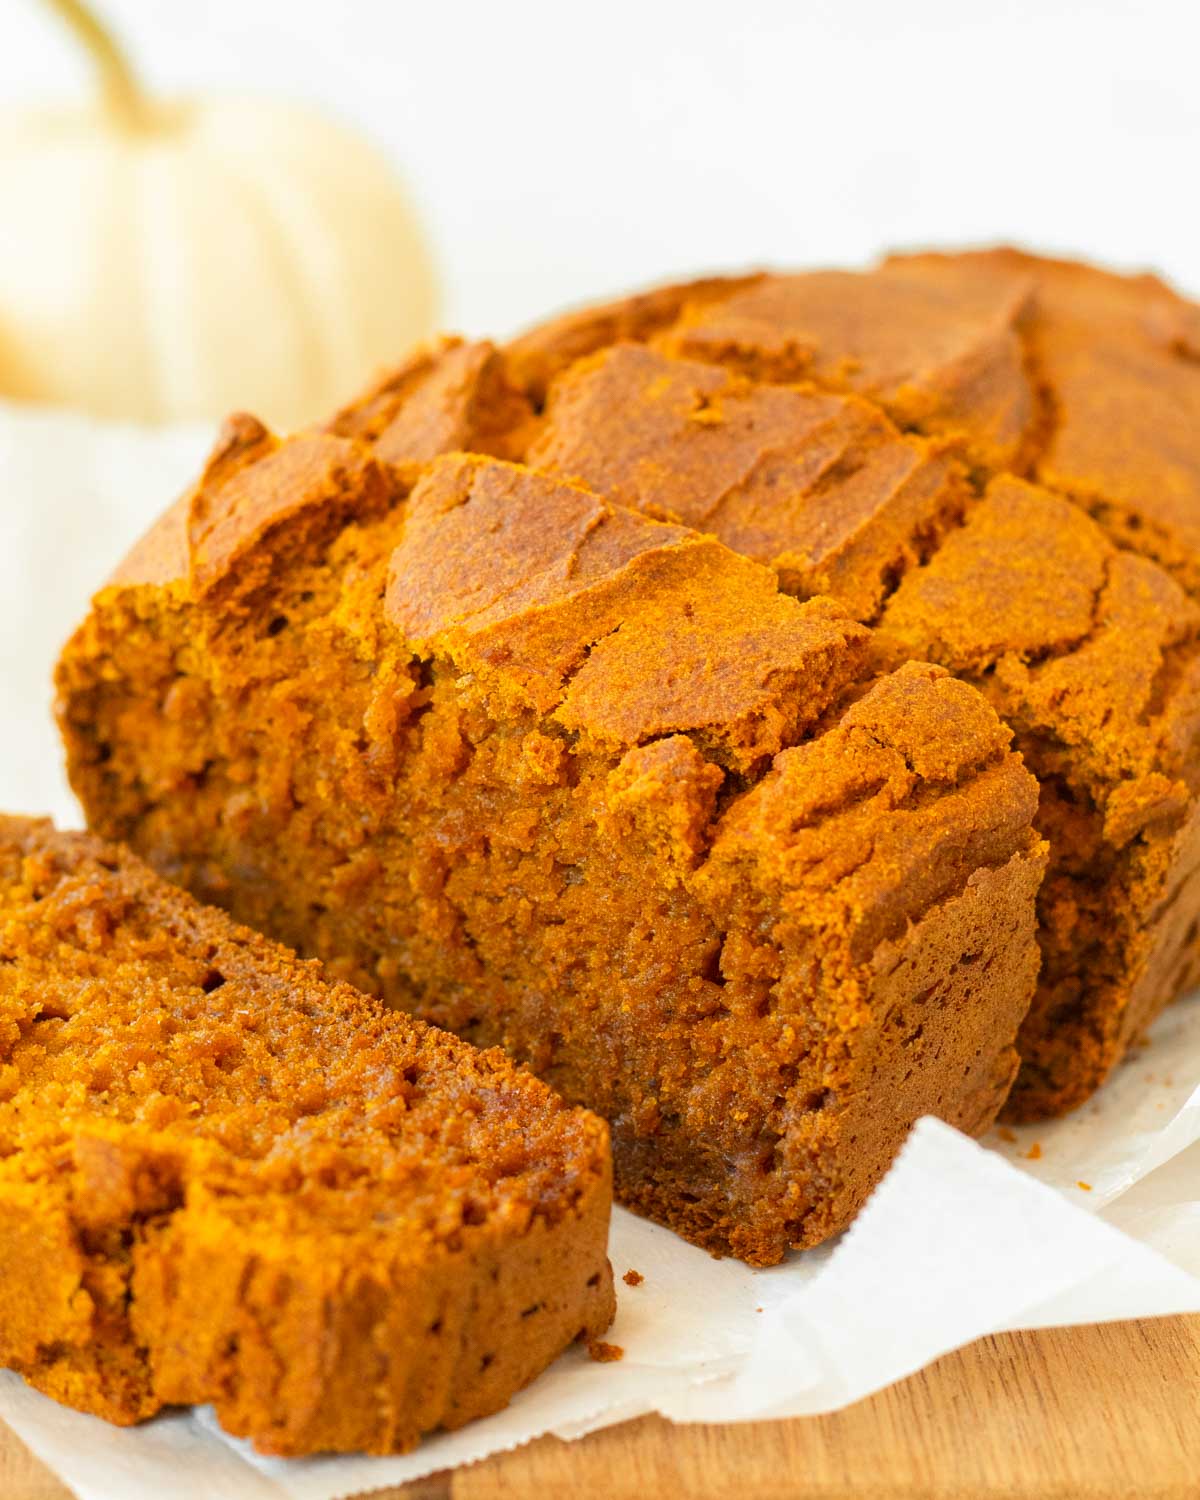 This homemade pumpkin bread is an easy one-bowl pumpkin bread recipe perfect for a quick breakfast or easy fall snack. Made with simple ingredients and a blend of warm spices, this pumpkin bread is a classic fall recipe.